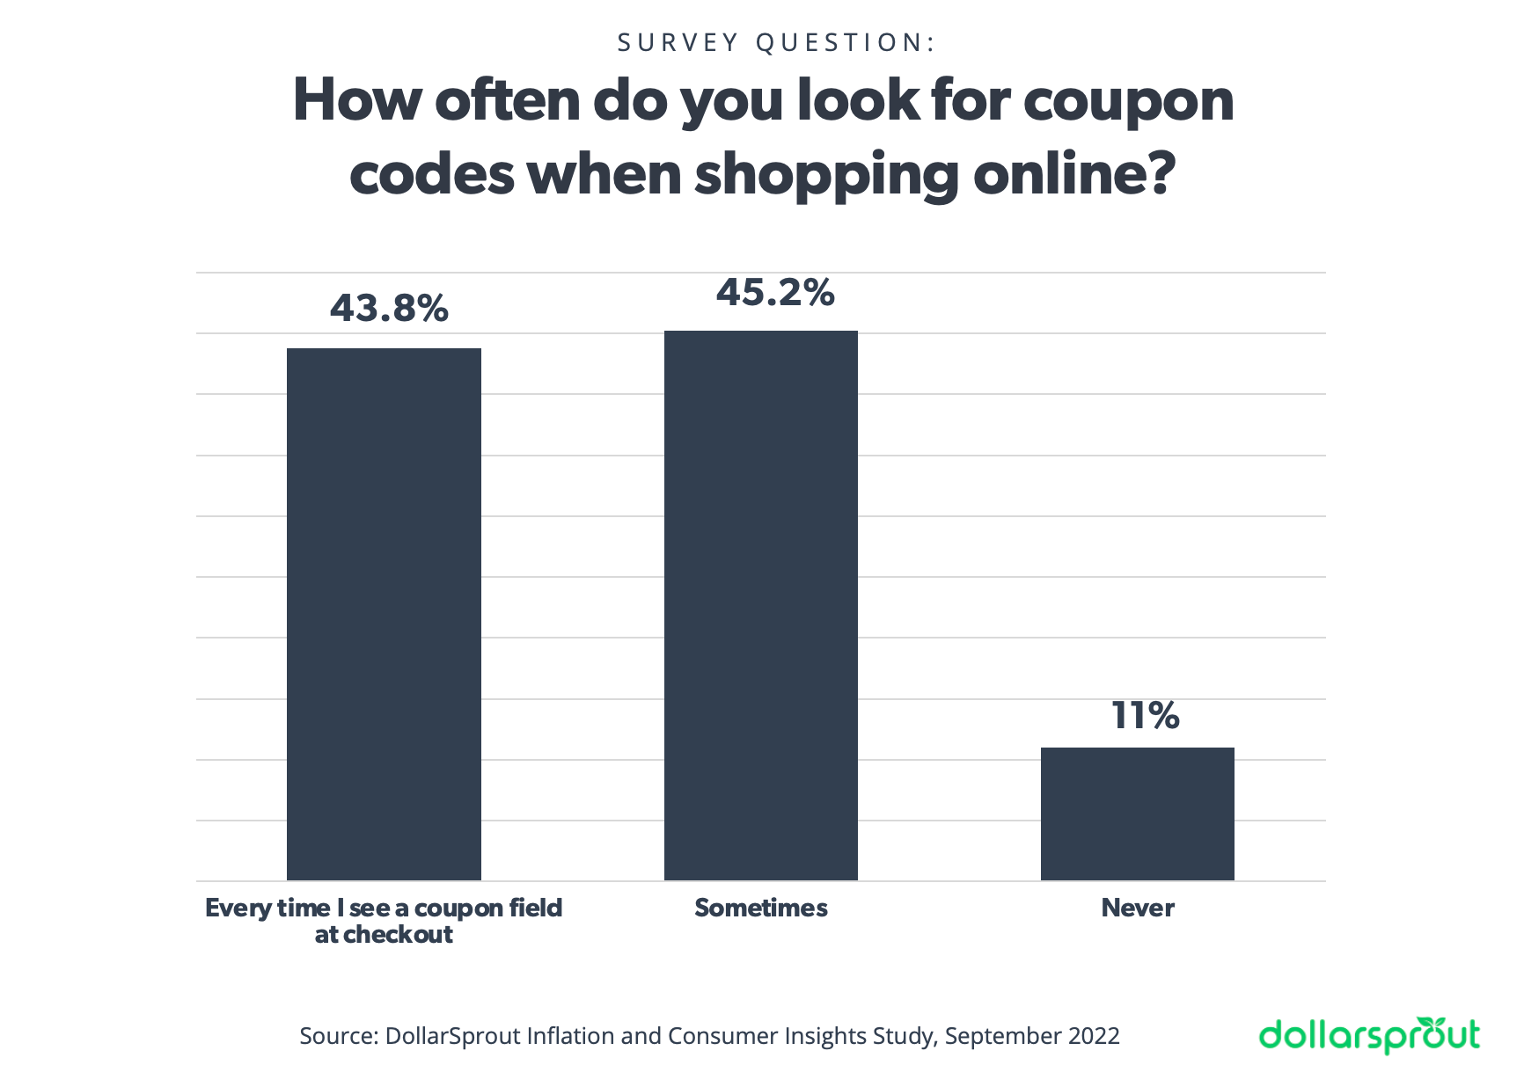 How often do you look for coupon codes when shopping online? Most answered Sometimes or Never.